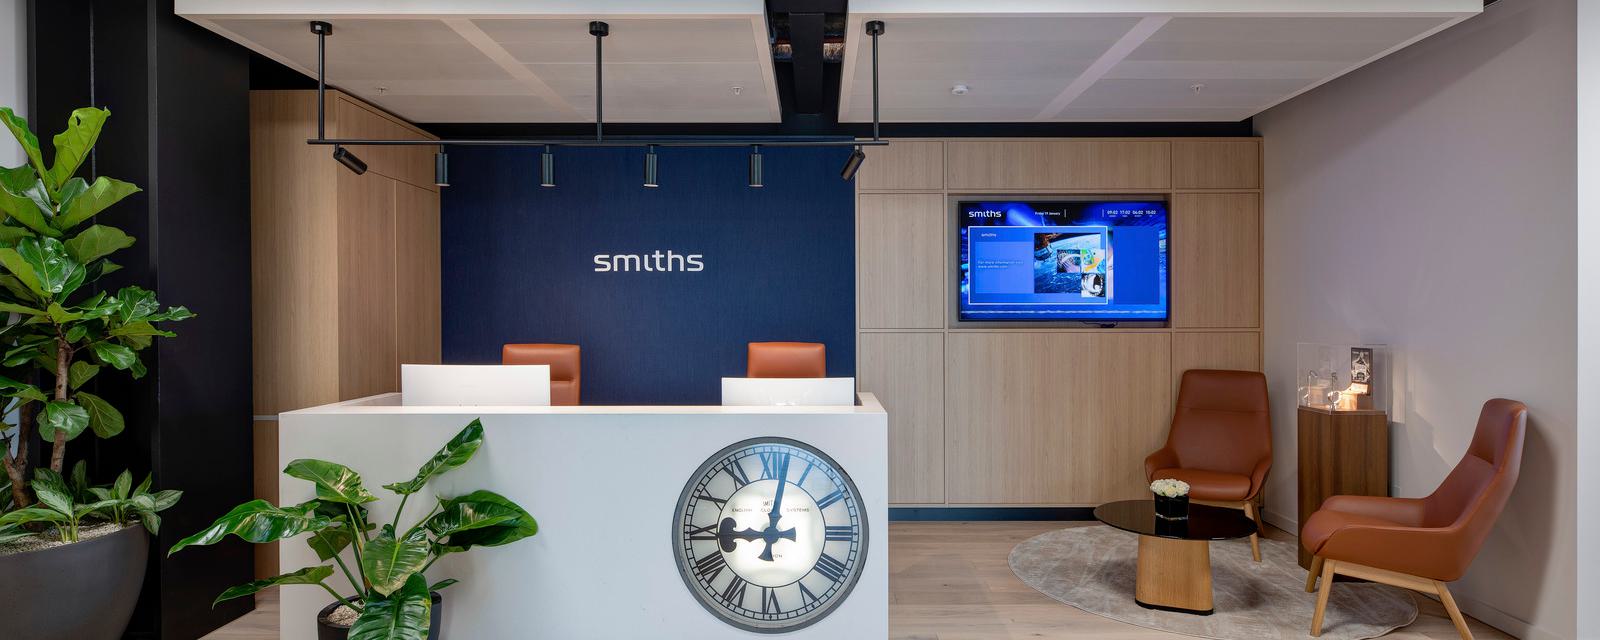 Reception area with large clock on front of reception desk